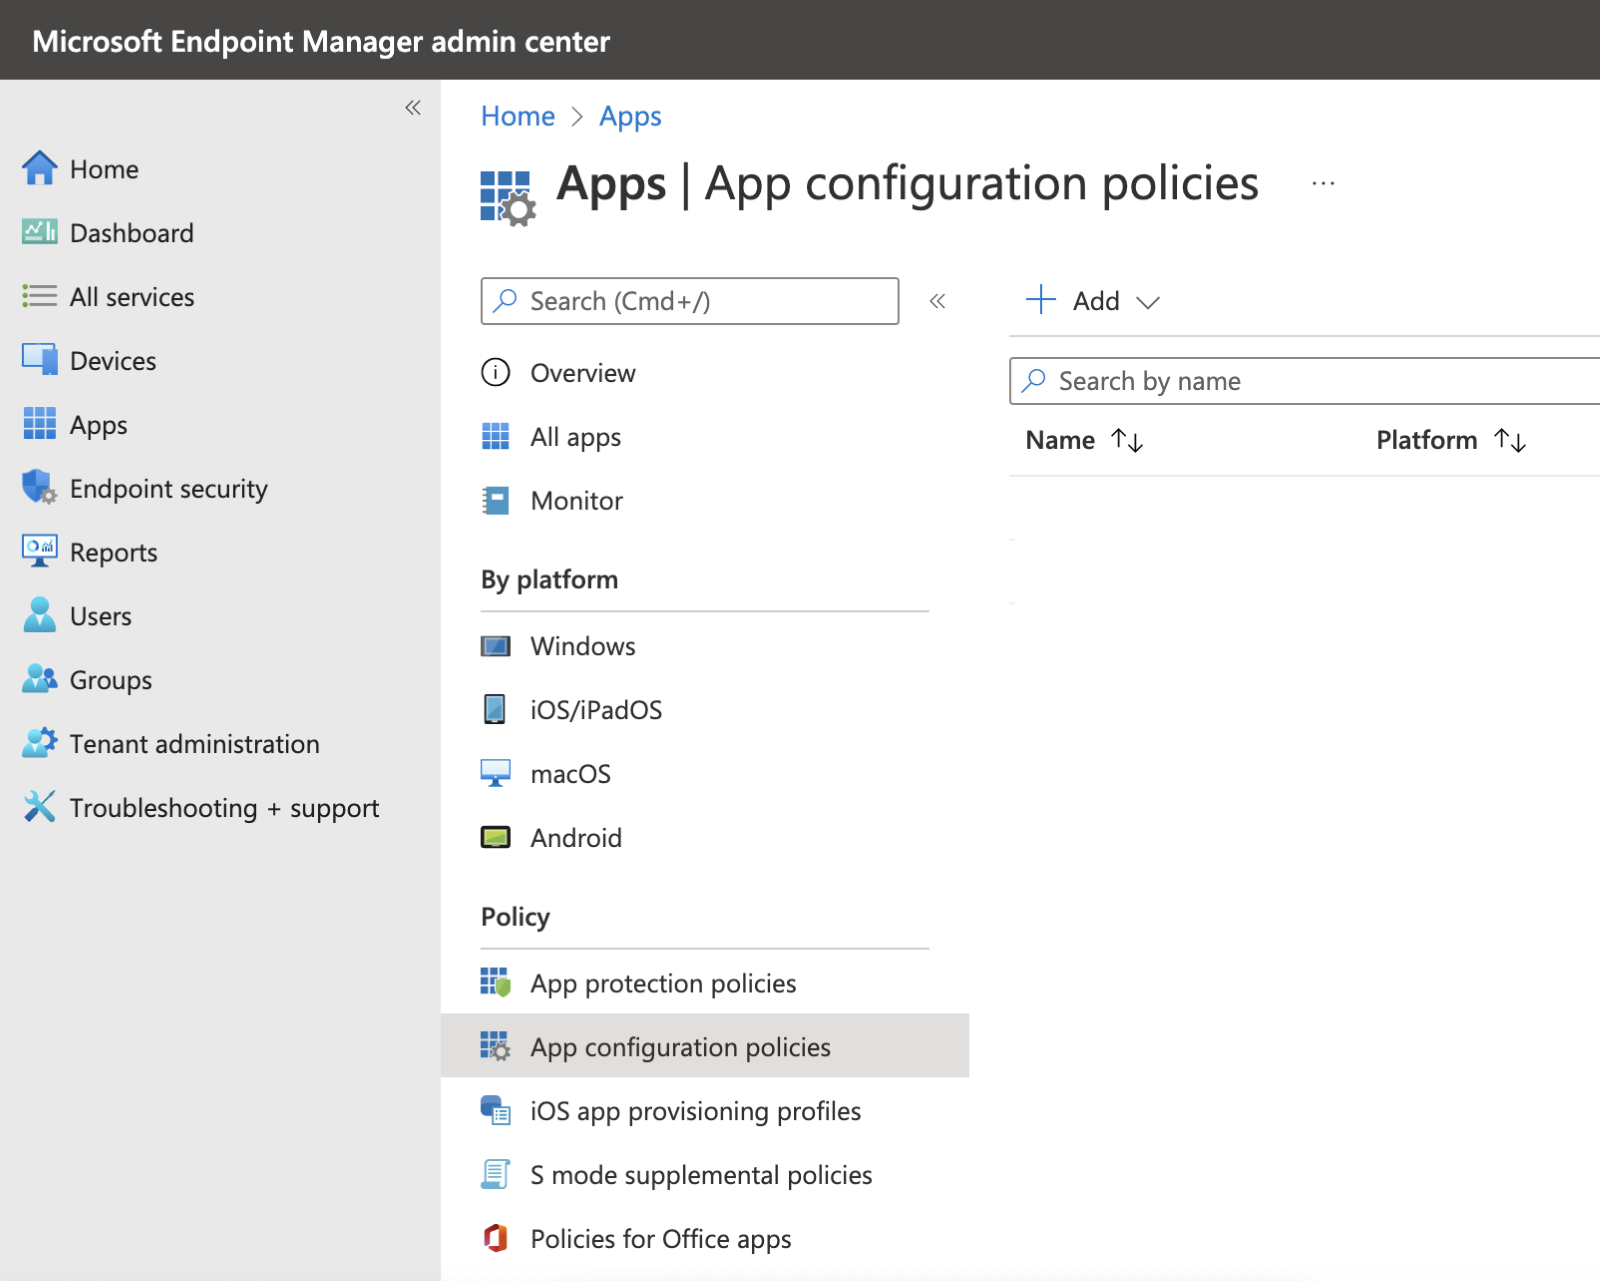 Then, once you are done setting a App Protection Policy, go to App Configuration Policies, click Add > Managed Apps.